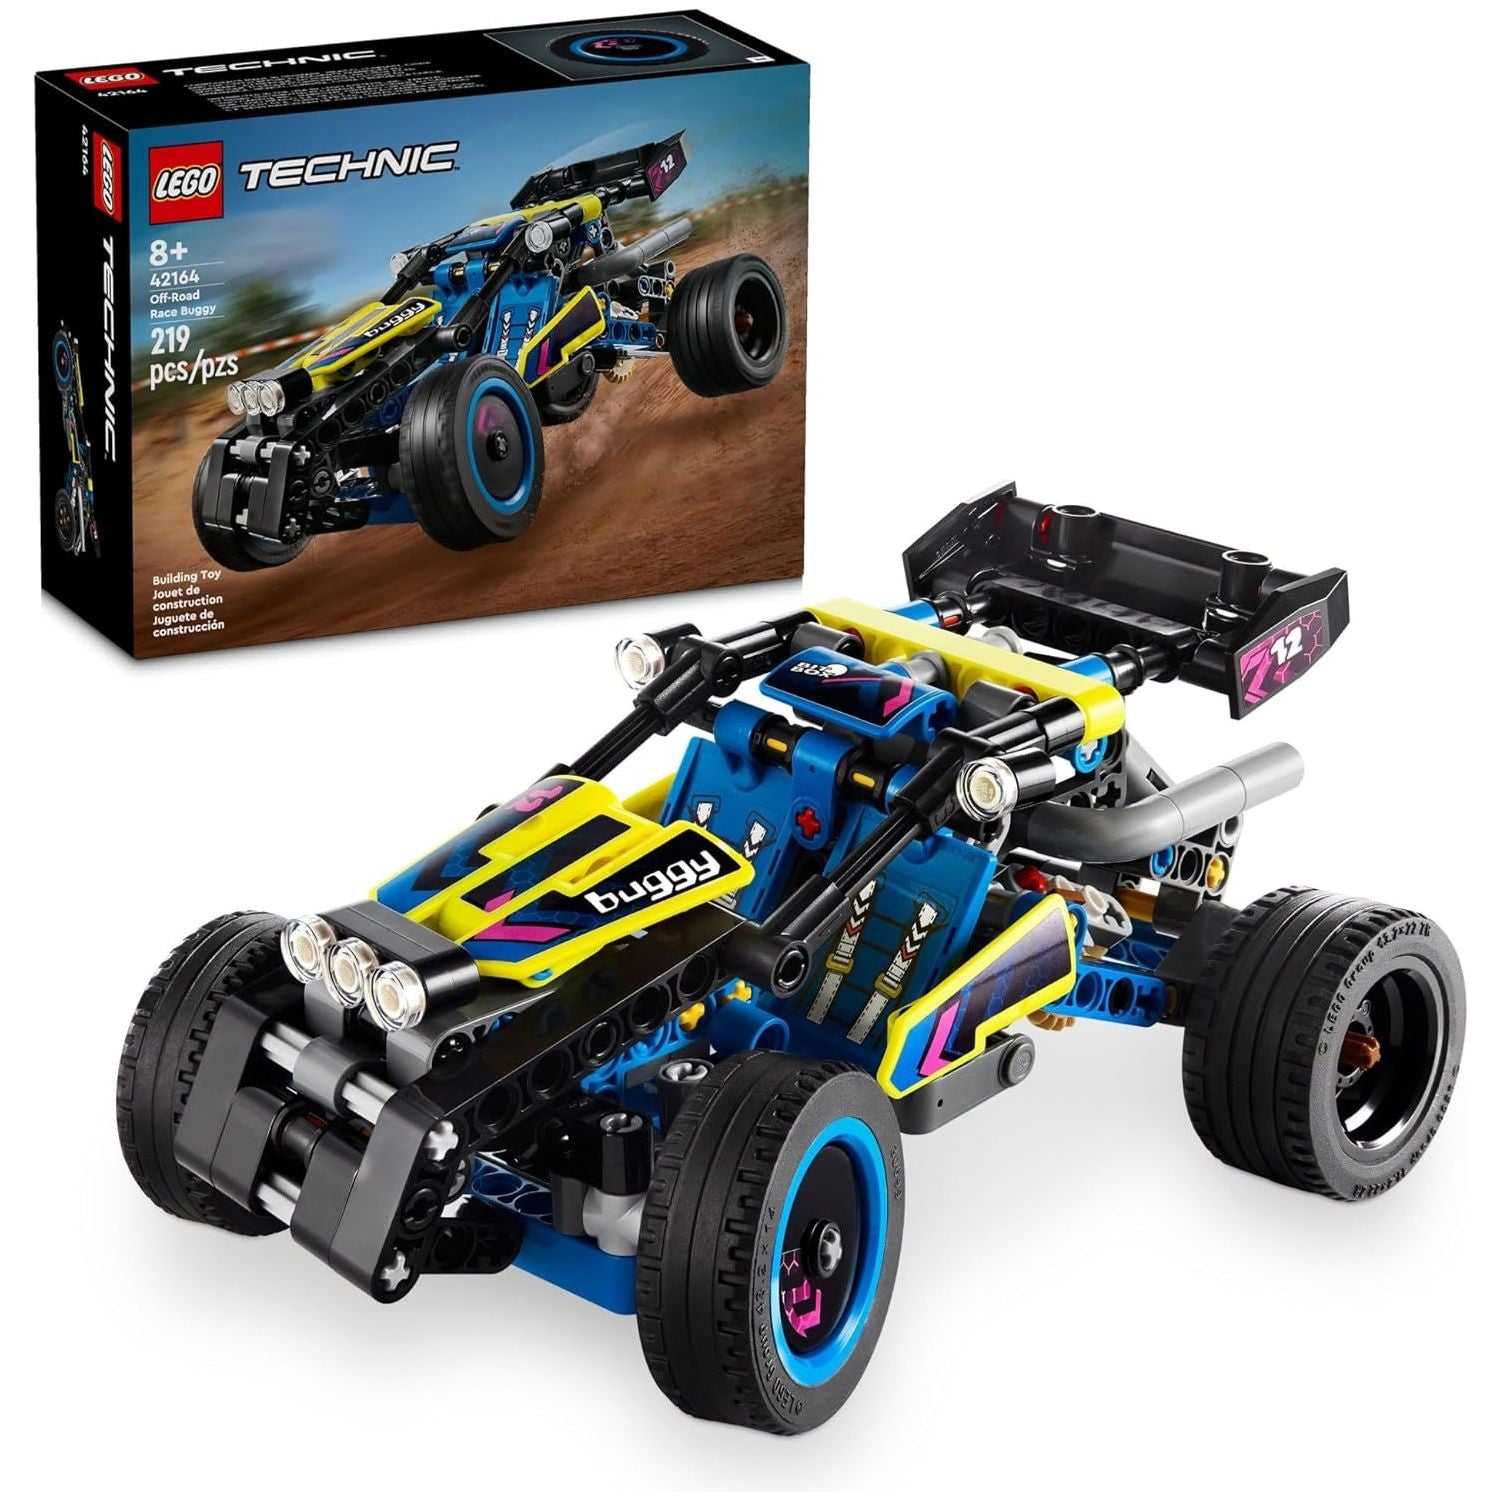 LEGO 42164 Technic Off-Road Race Buggy Buildable Car Toy, Cool Toy for 8 Year Old Boys, Girls and Kids who Love Rally Contests, Race Car Toy Featuring Moving 4-Cylinder Engine and Working Suspension.